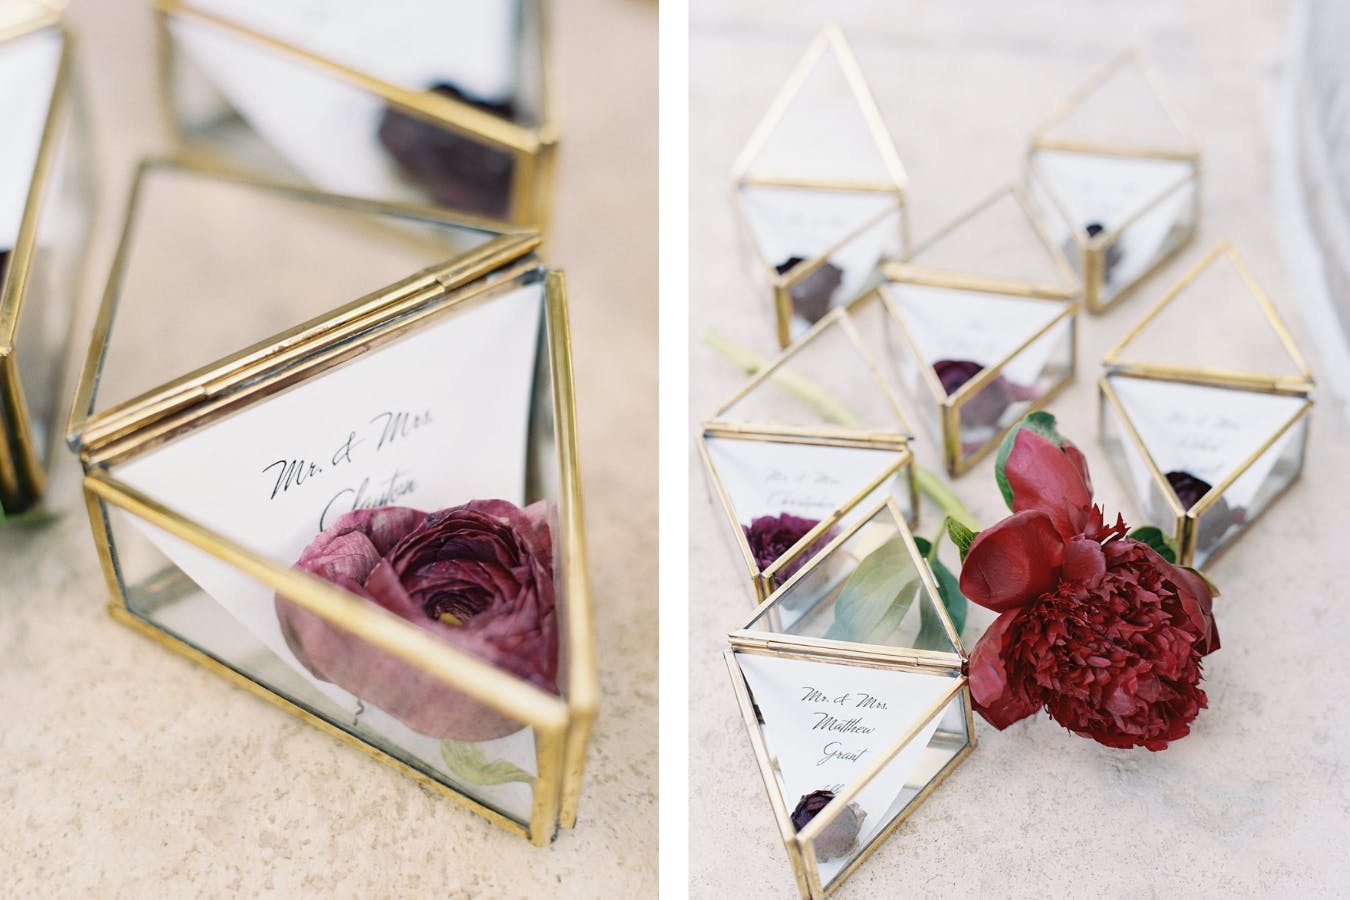 Diamond-Shaped Glass Jewelry Boxes Holding Red Flowers and Place Cards for Wedding Celebration | PartySlate